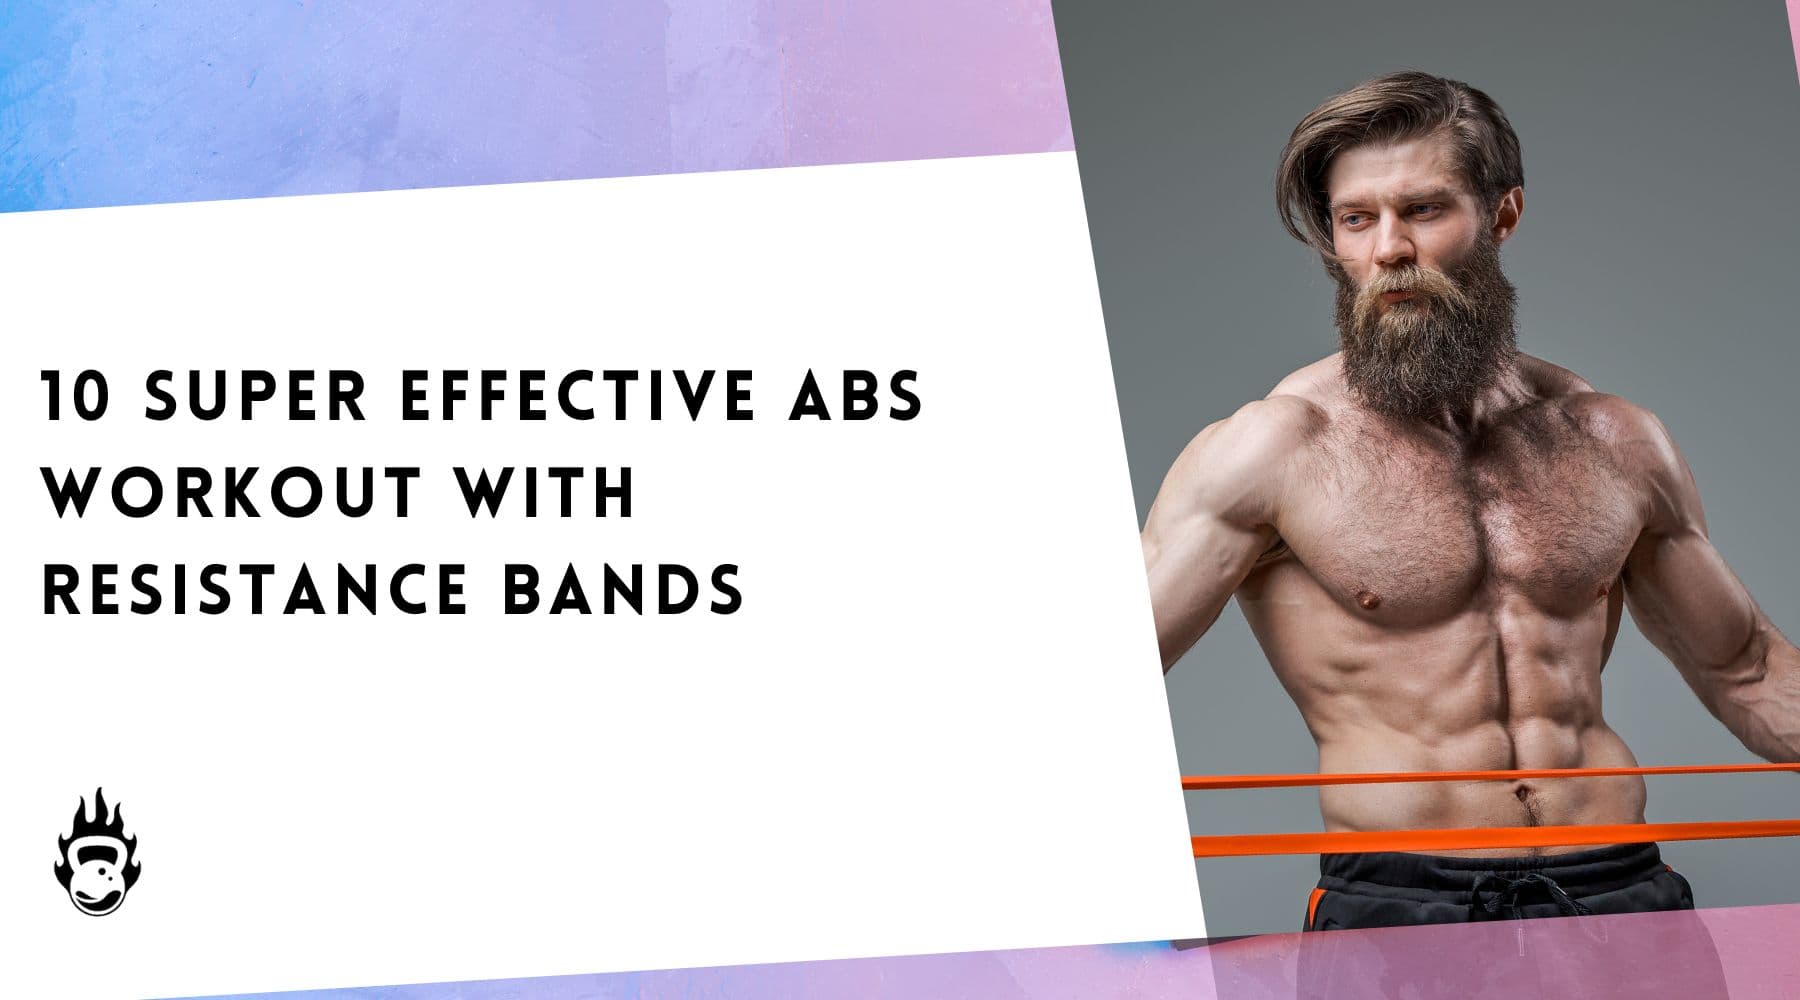 11 Amazing Benefits Of Resistance Bands